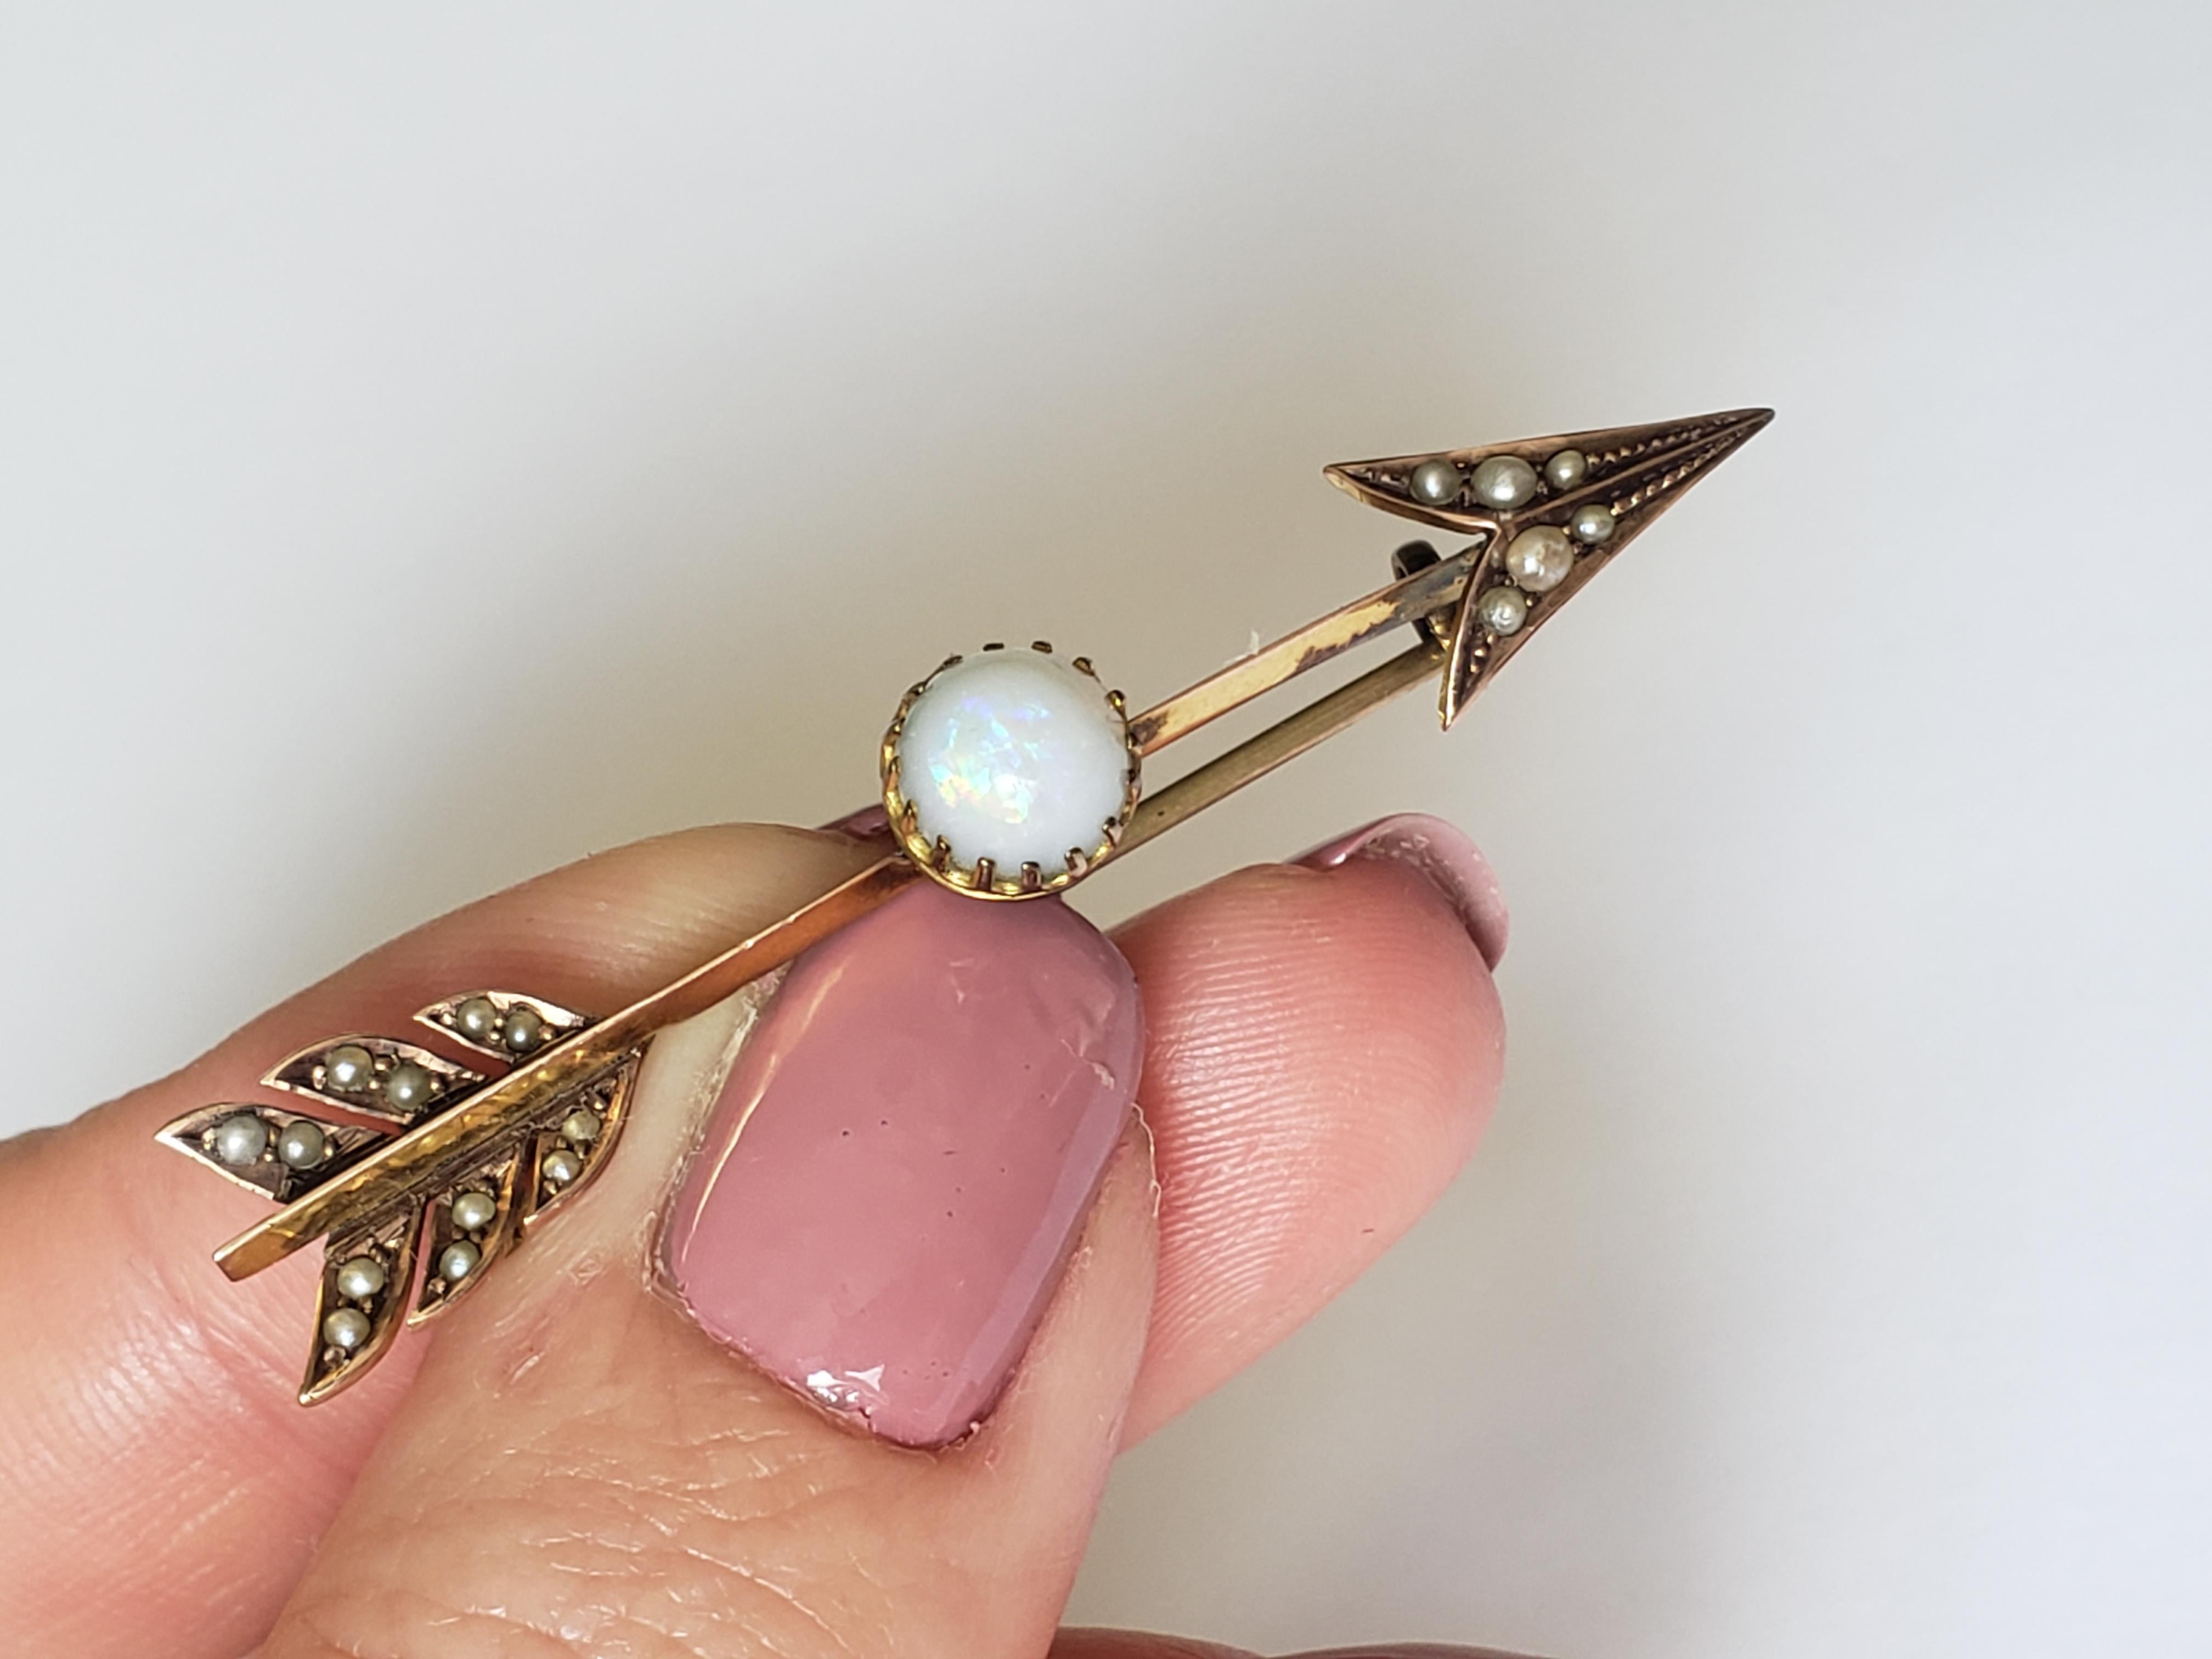 A Lovely Antique Edwardian c.1900 9 Carat Gold, Opal and Seed Pearl Arrow brooch. English origin.

Length 52mm, width 10mm.

Weight 2.8gr.

Marked 9CT for 9 Carat Gold.

Brooch in good condition, completed with stones and yellow metal pin.